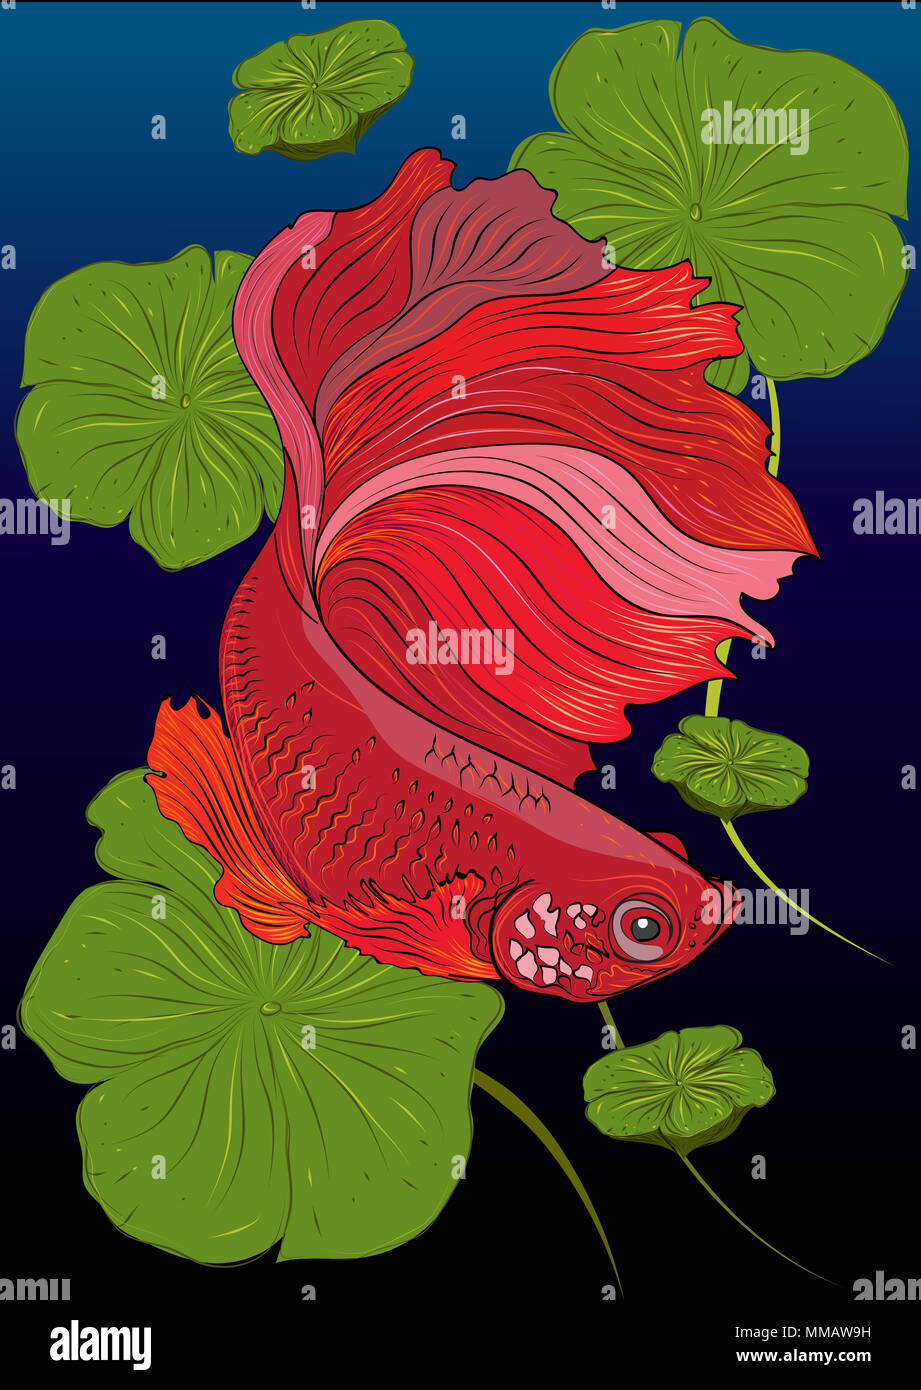 Vector color drawing of  betta or simese fighting fish illustation. Stock Photo